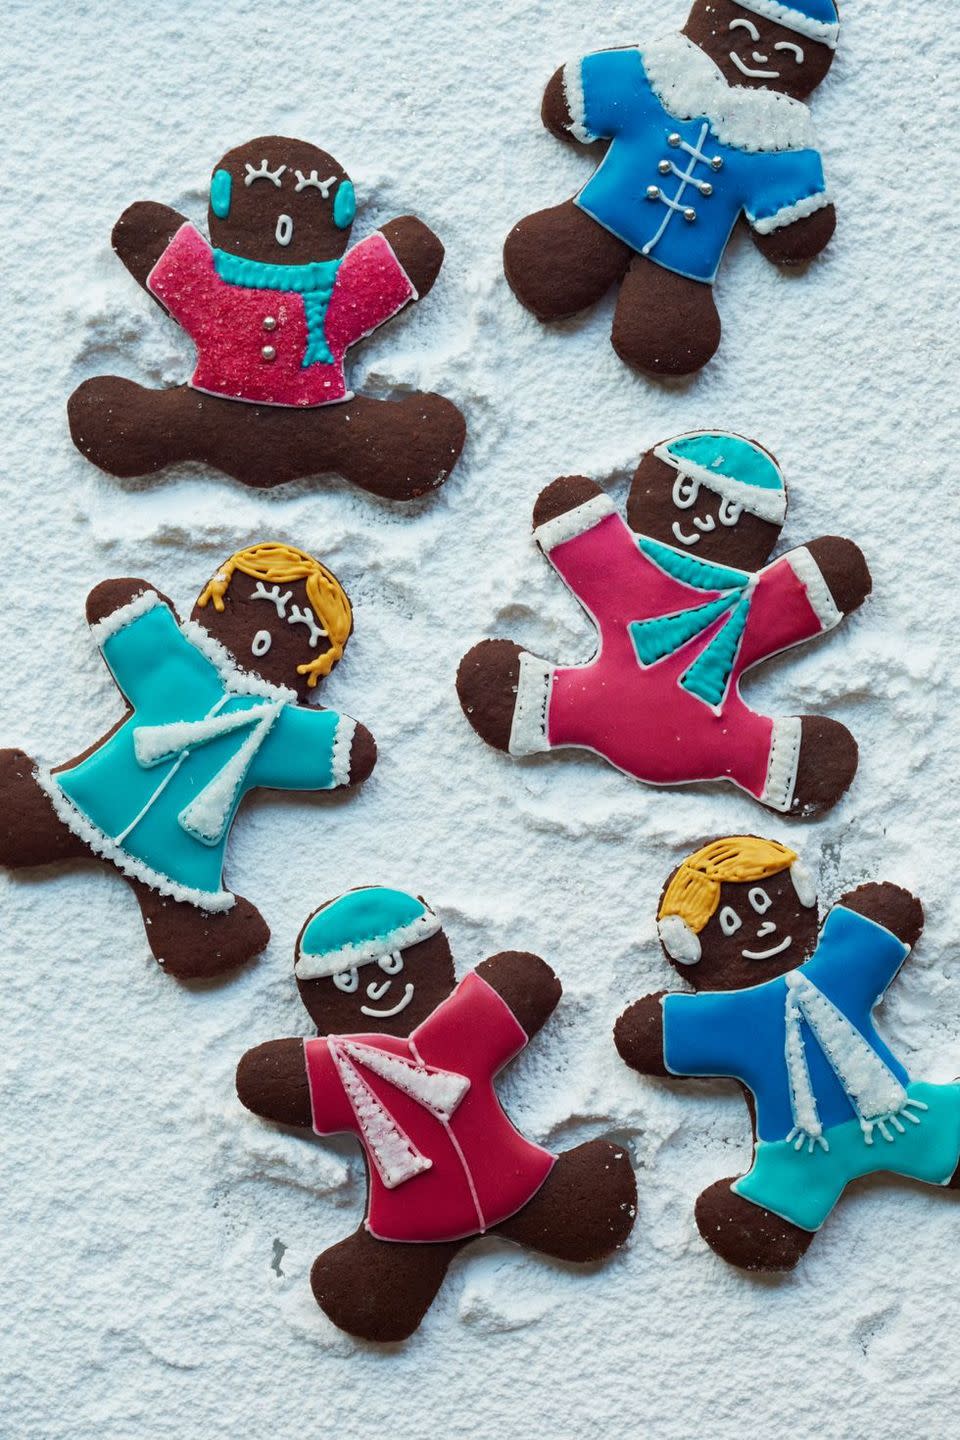 Chocolate Gingerbread Snow Angels